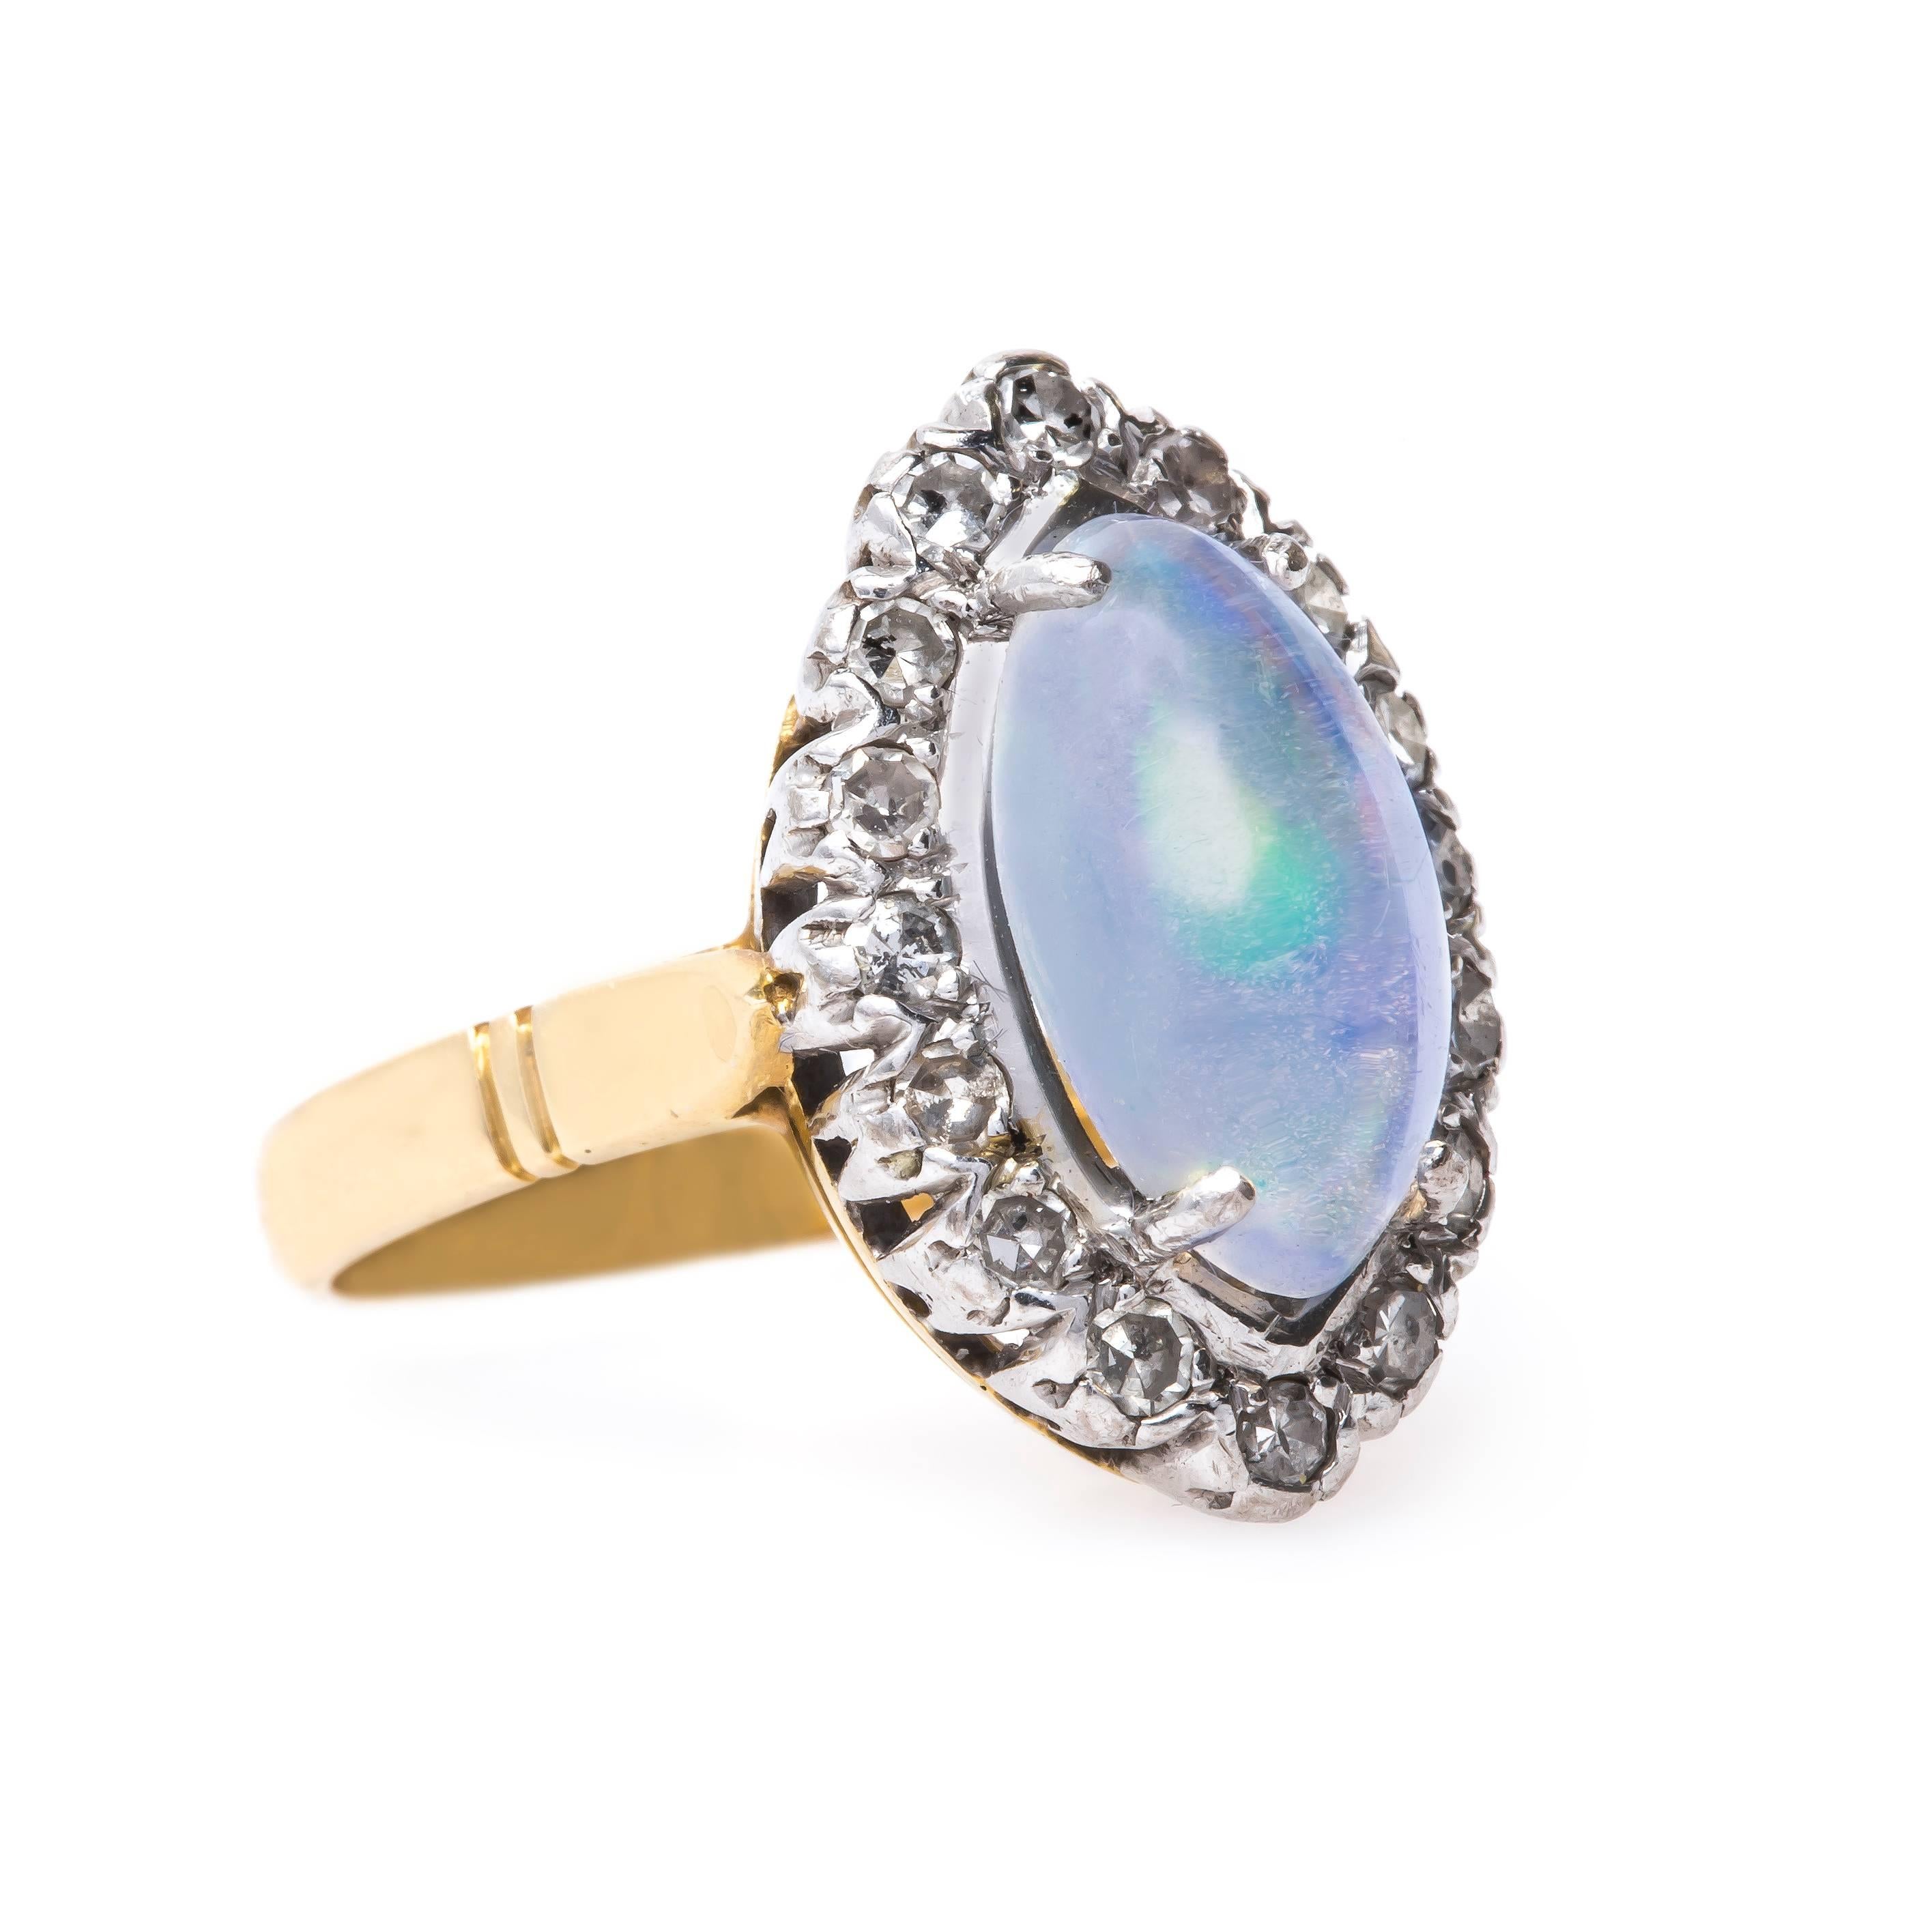 Beechcroft is a bold Retro era (circa 1940) 18k white and yellow gold cocktail ring sure to make a statement! This vintage stunner centers an unusual Contra Luz Marquise Cut Cabochon opal gauged at 13.8mm x 8mm displaying a dreamy transparency mixed